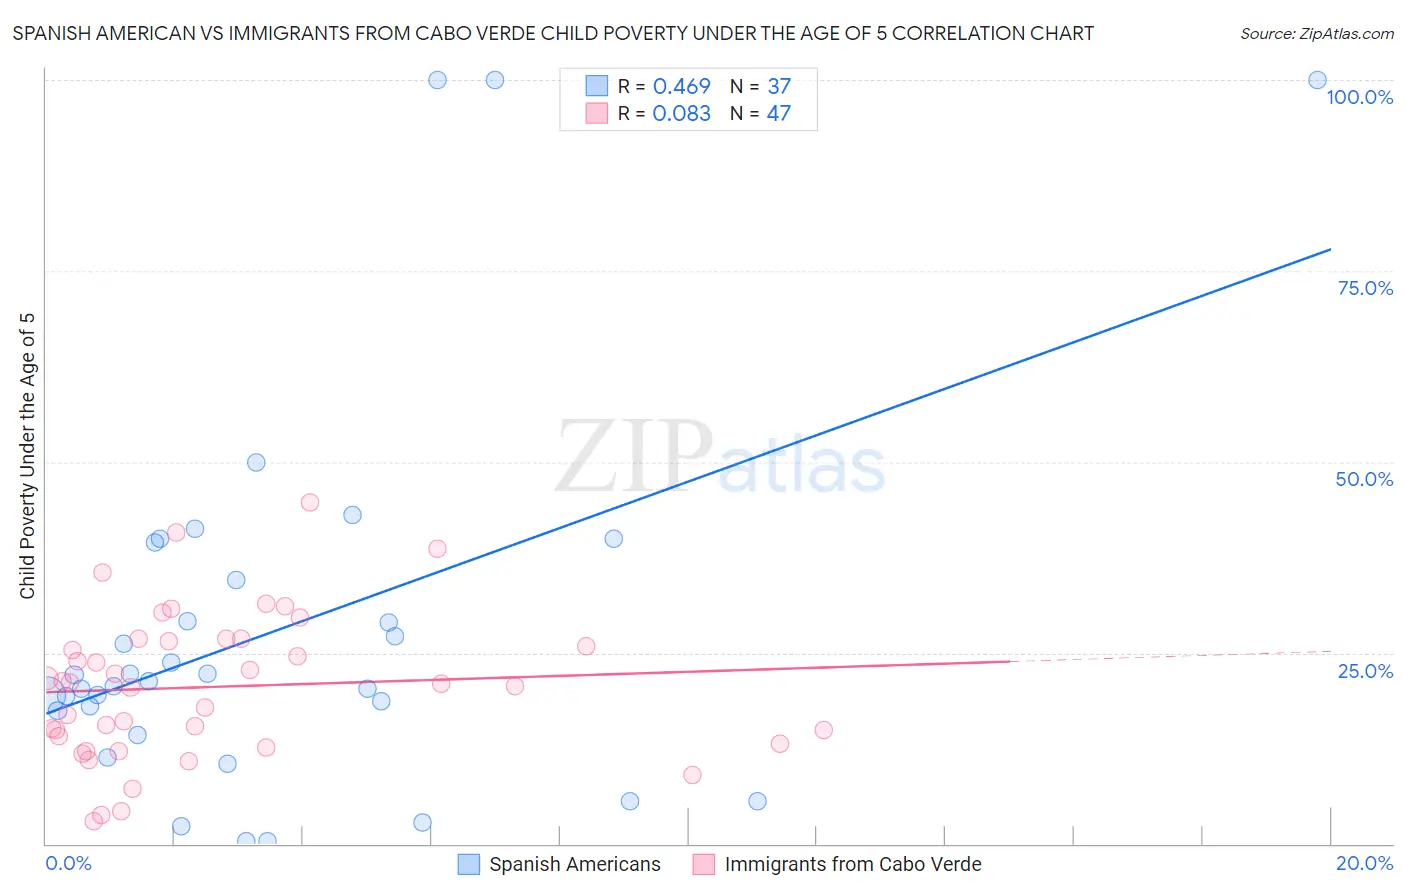 Spanish American vs Immigrants from Cabo Verde Child Poverty Under the Age of 5